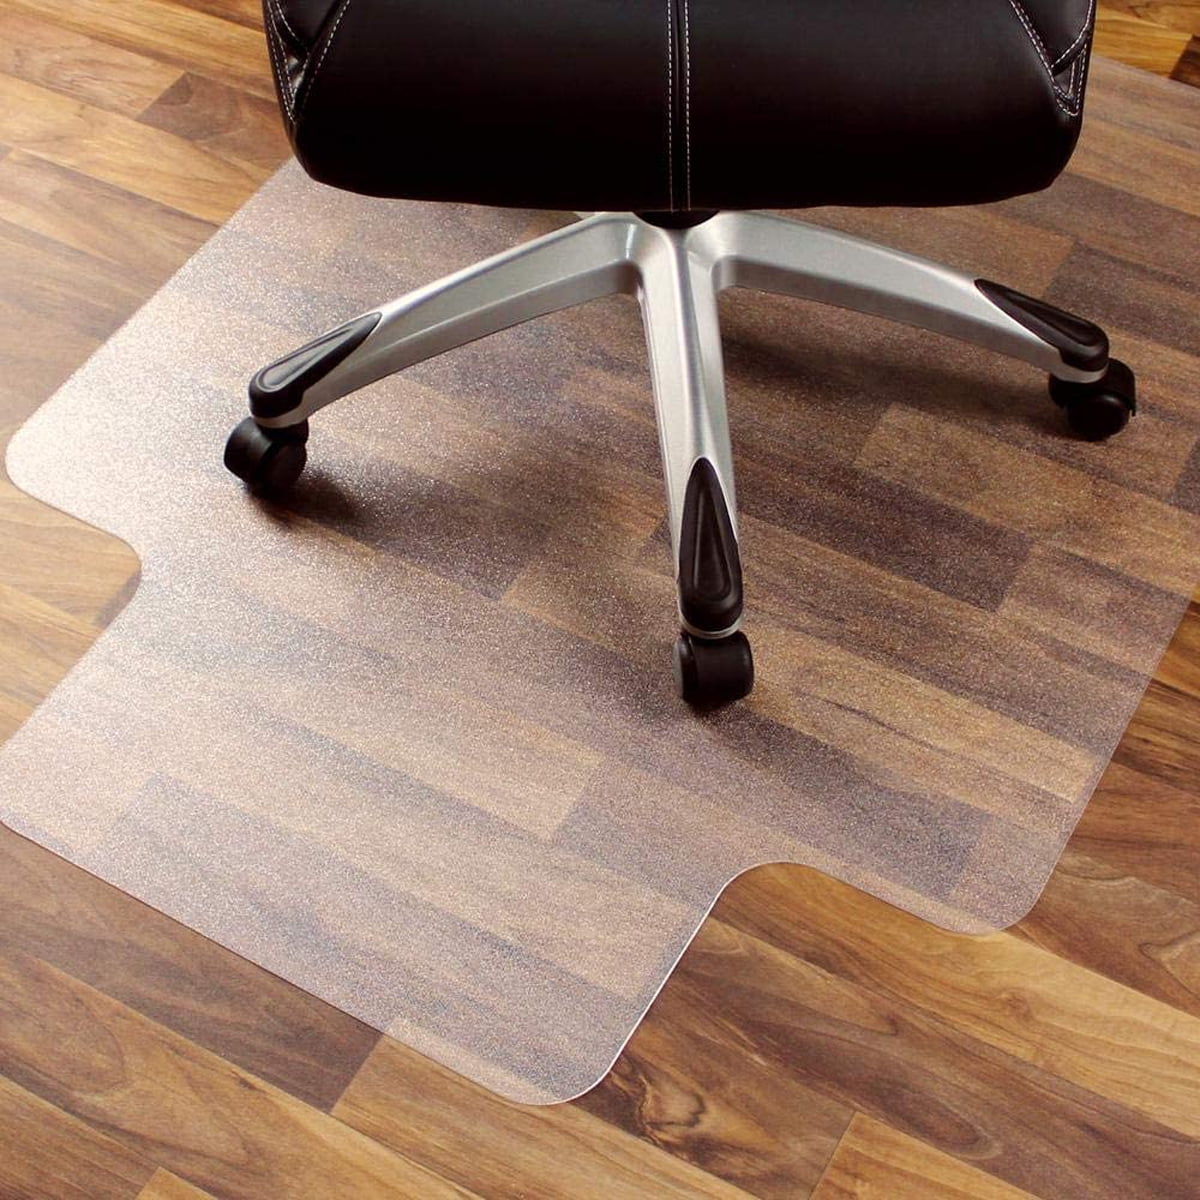 Details about   36" X 48" Transparent Home Office Desk Chair Mat PVC Protector For Hard Floor 